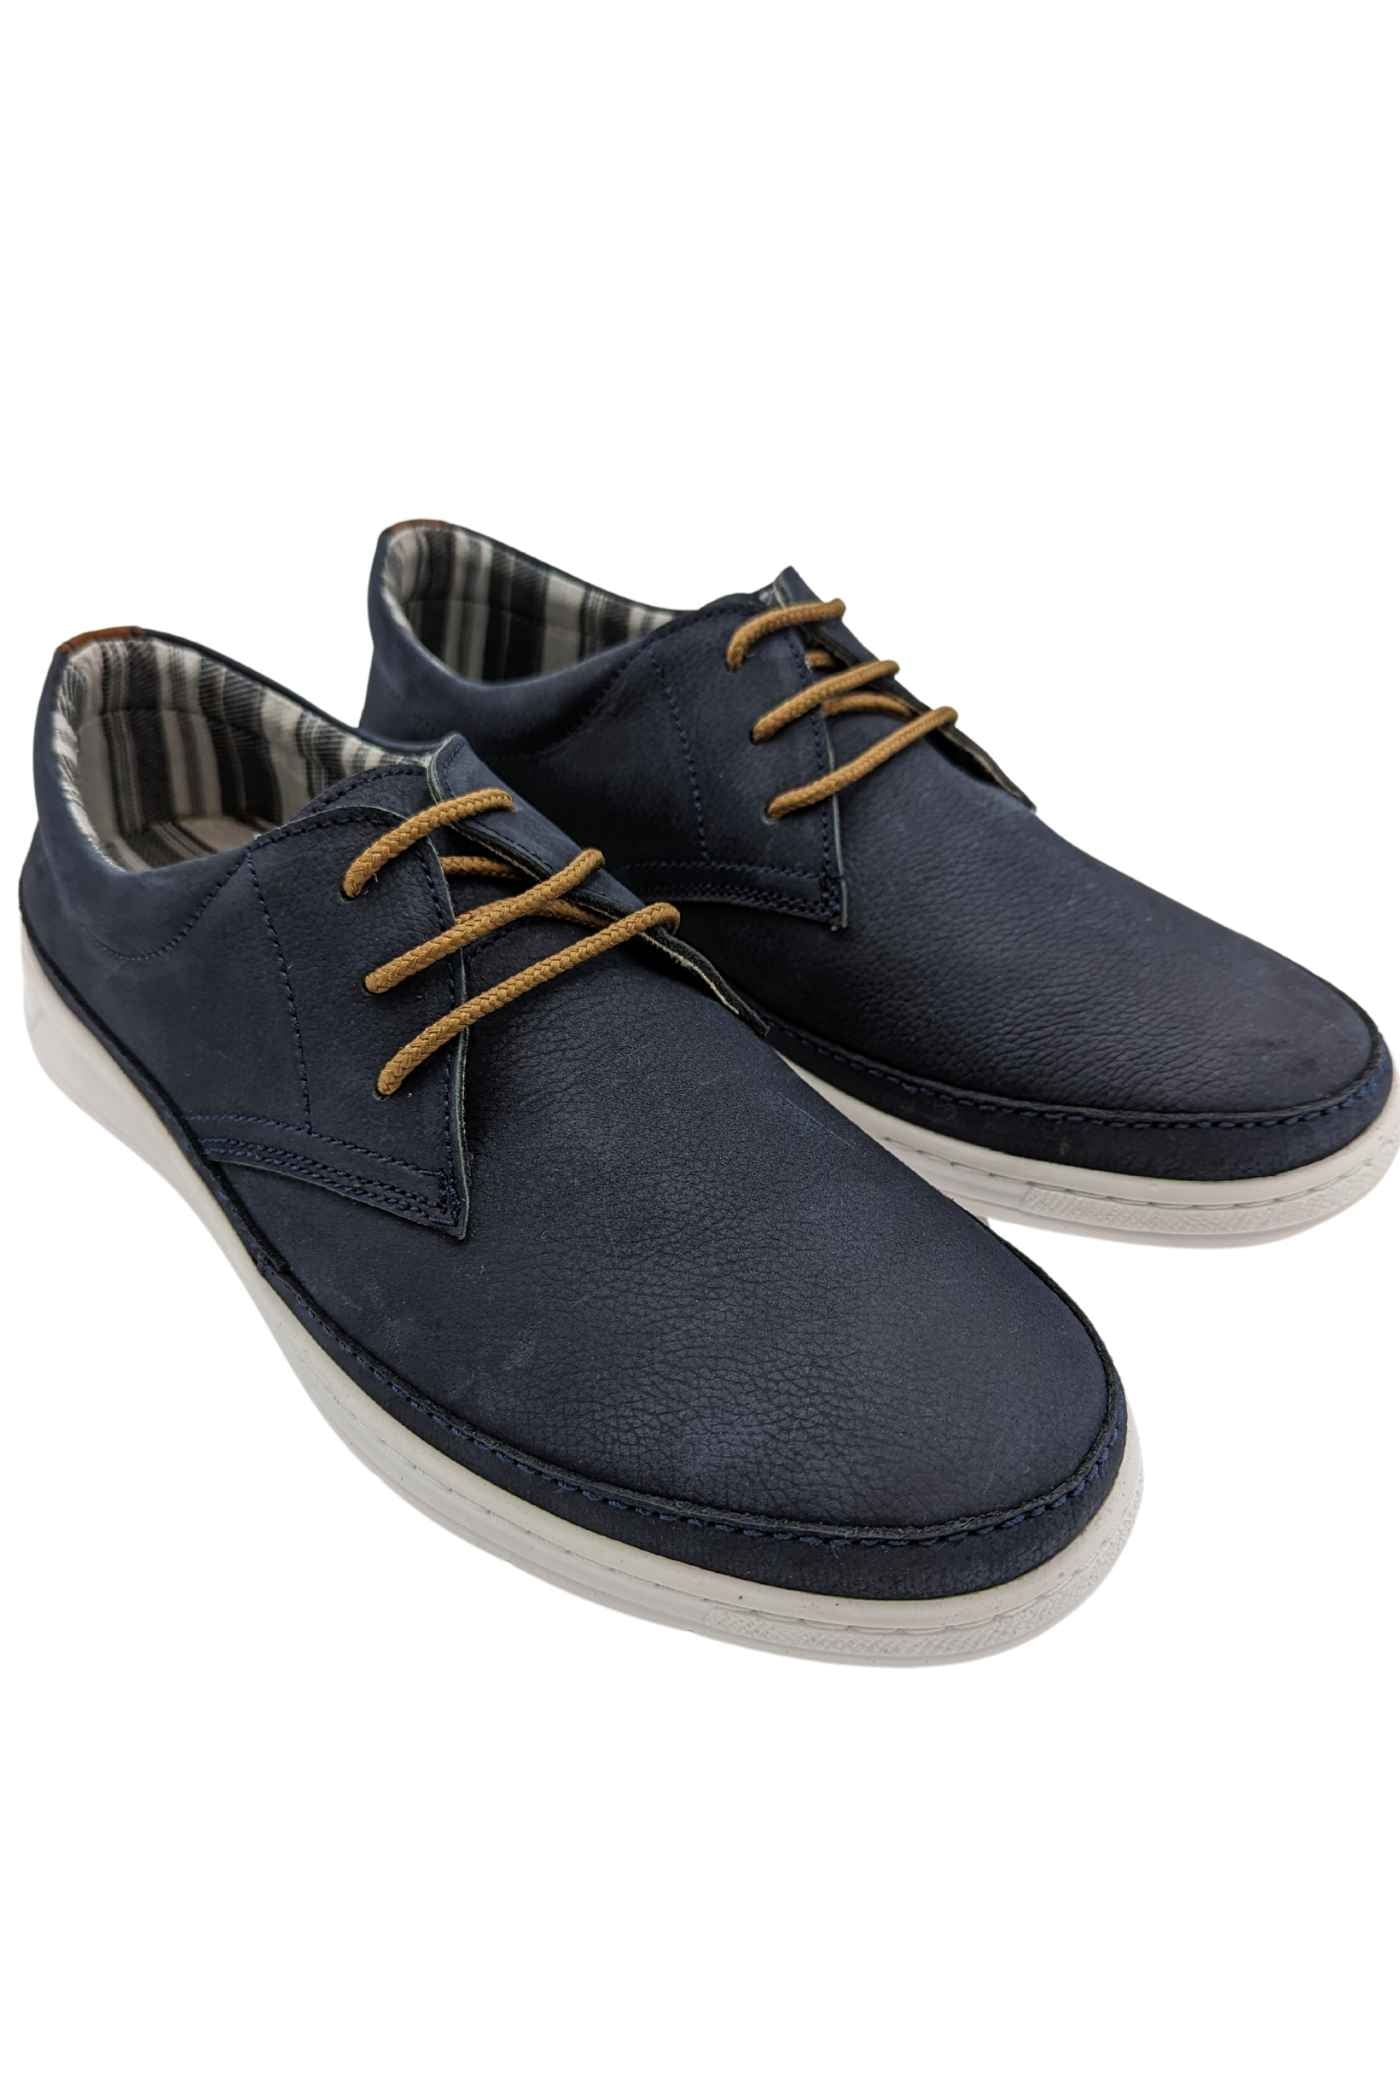 Sully Navy Shoe-Side view